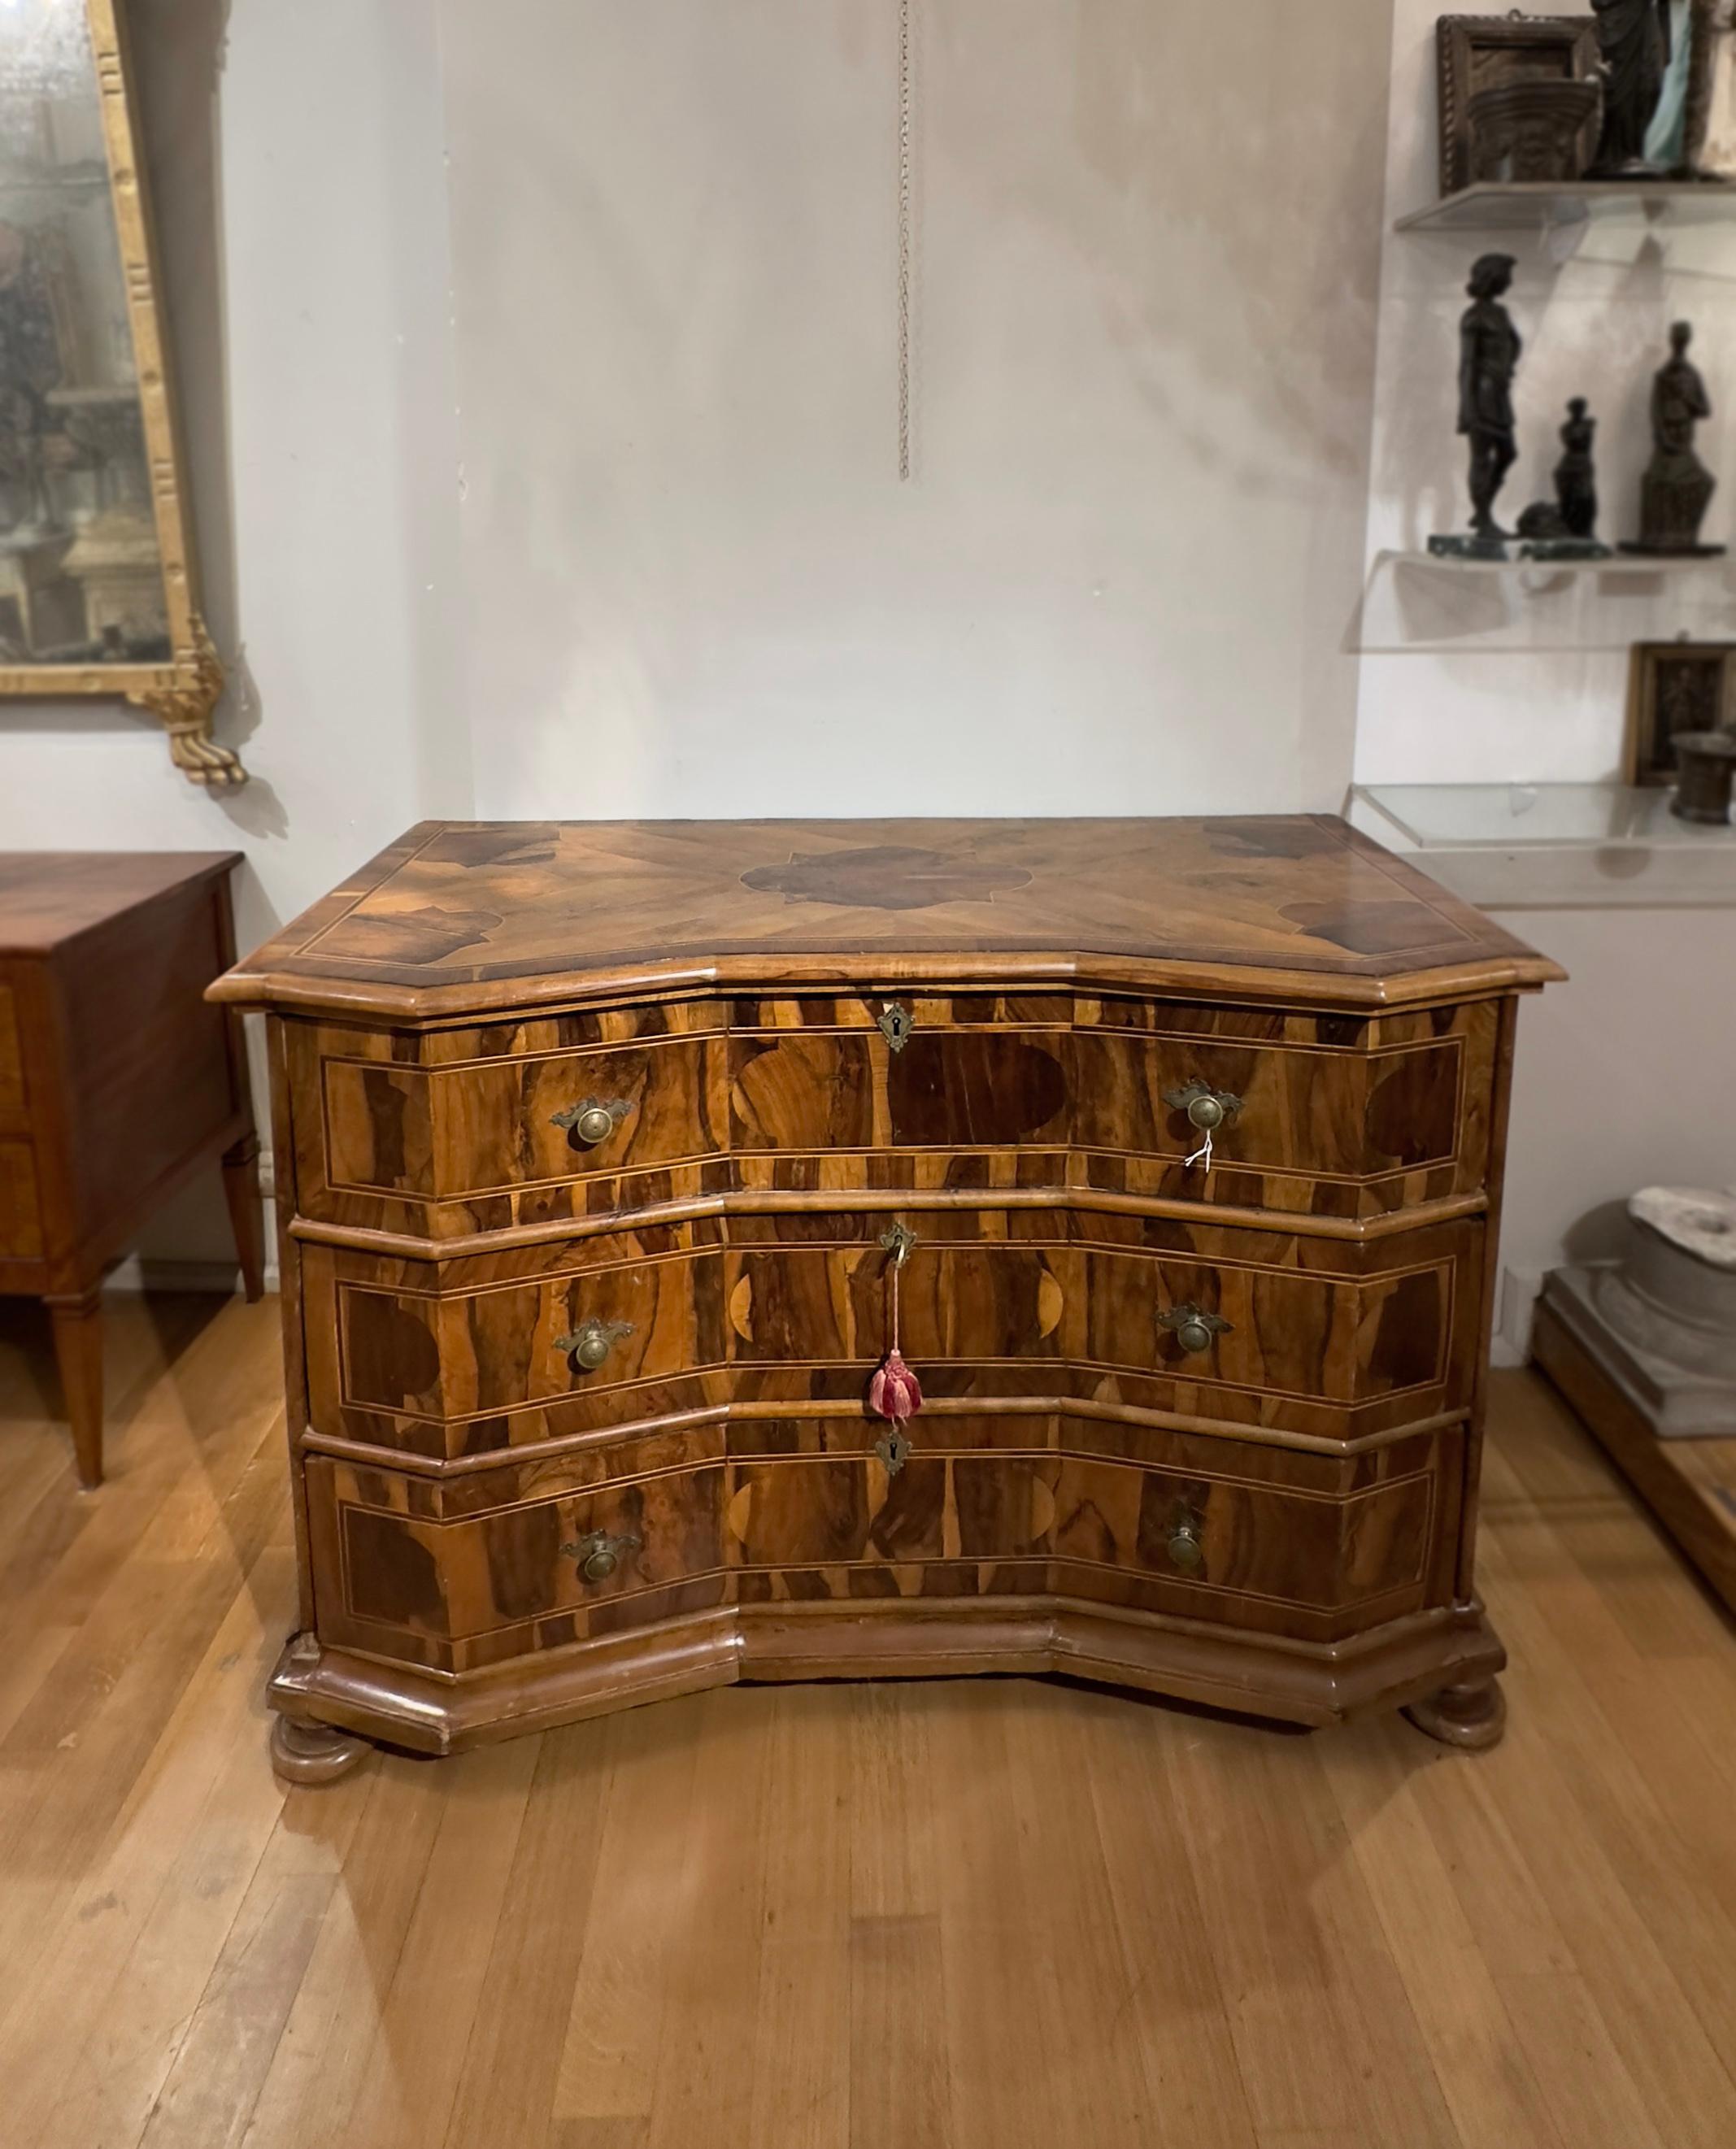 18th CENTURY VENETIAN VENEREED AND INLAID CHEST For Sale 6